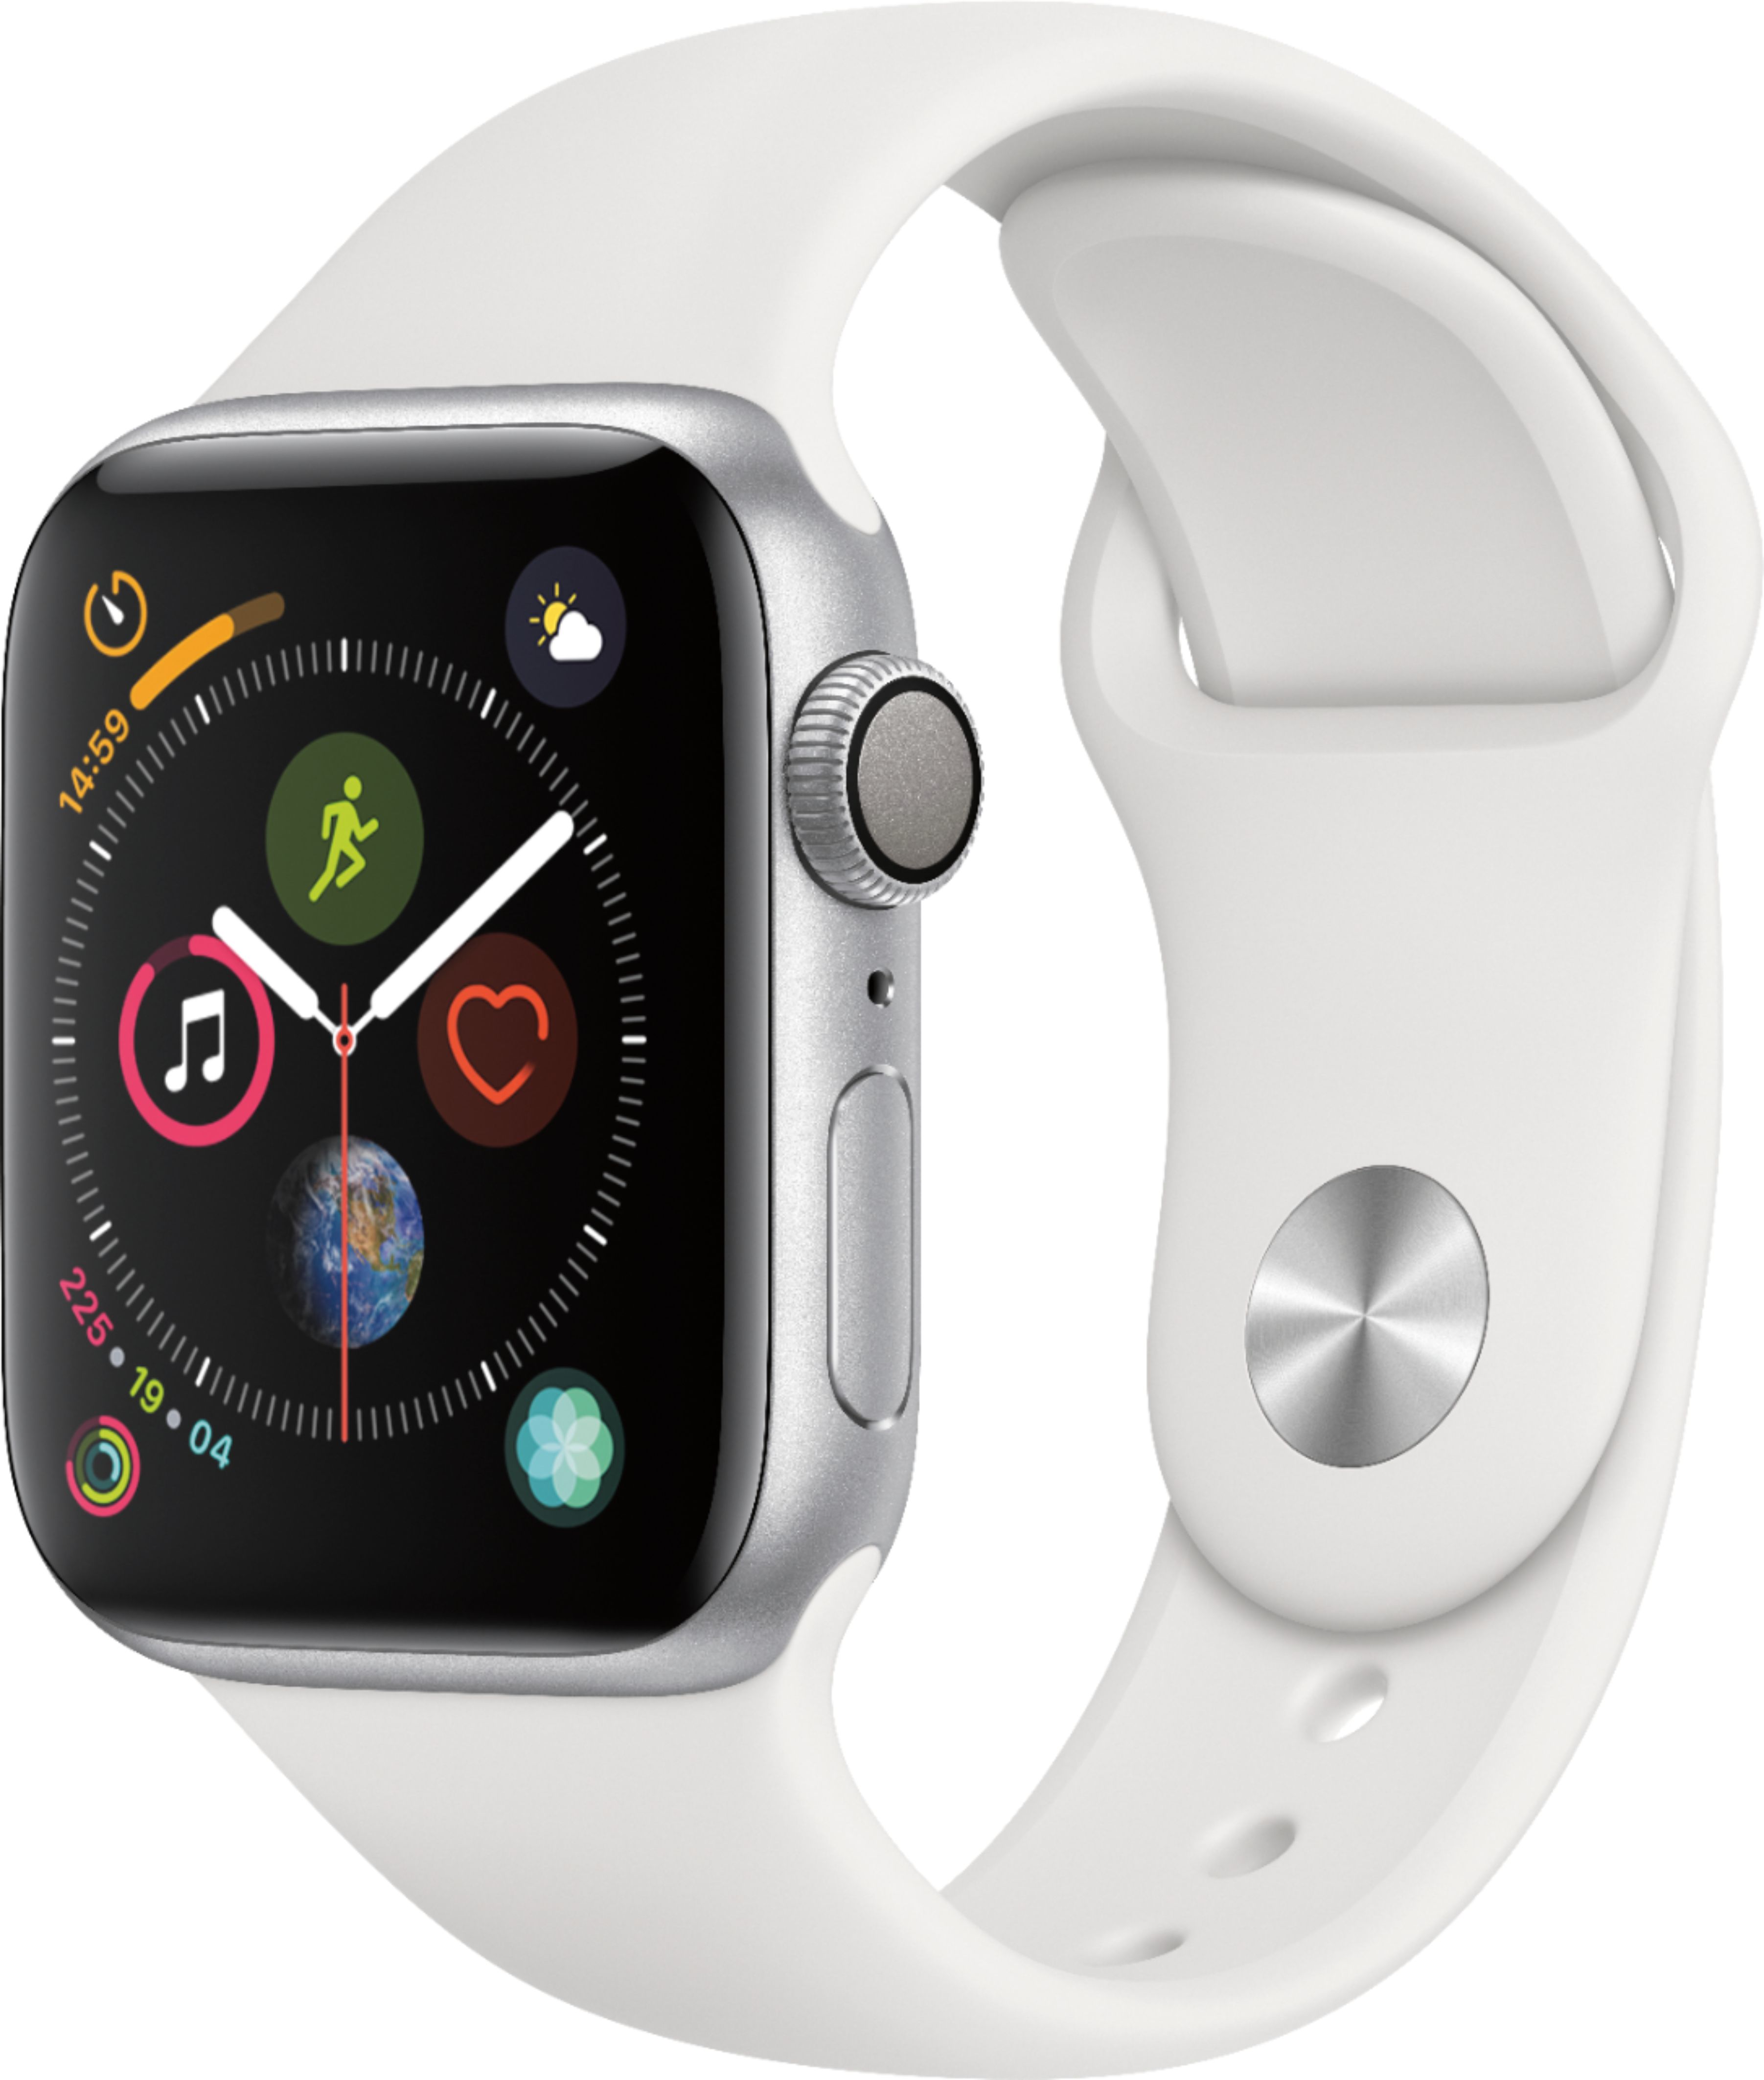 Geek Squad Certified Refurbished Apple Watch Series 4 (GPS) 40mm Silver Aluminum Case with White Sport Band - Silver Aluminum